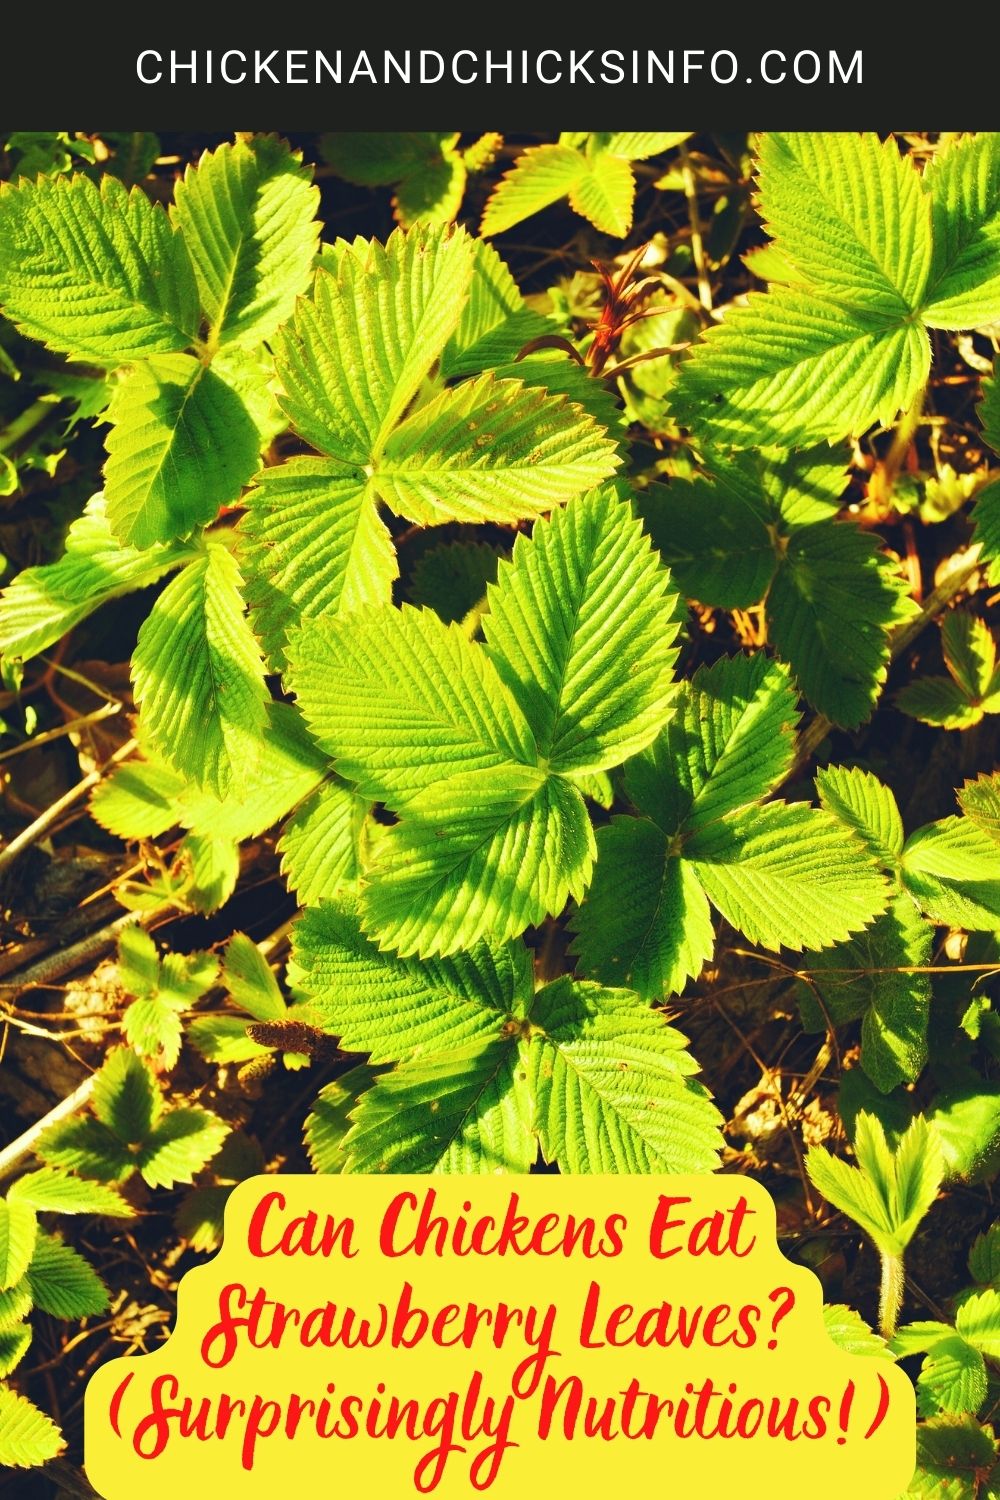 Can Chickens Eat Strawberry Leaves? (Surprisingly Nutritious!) poster.
